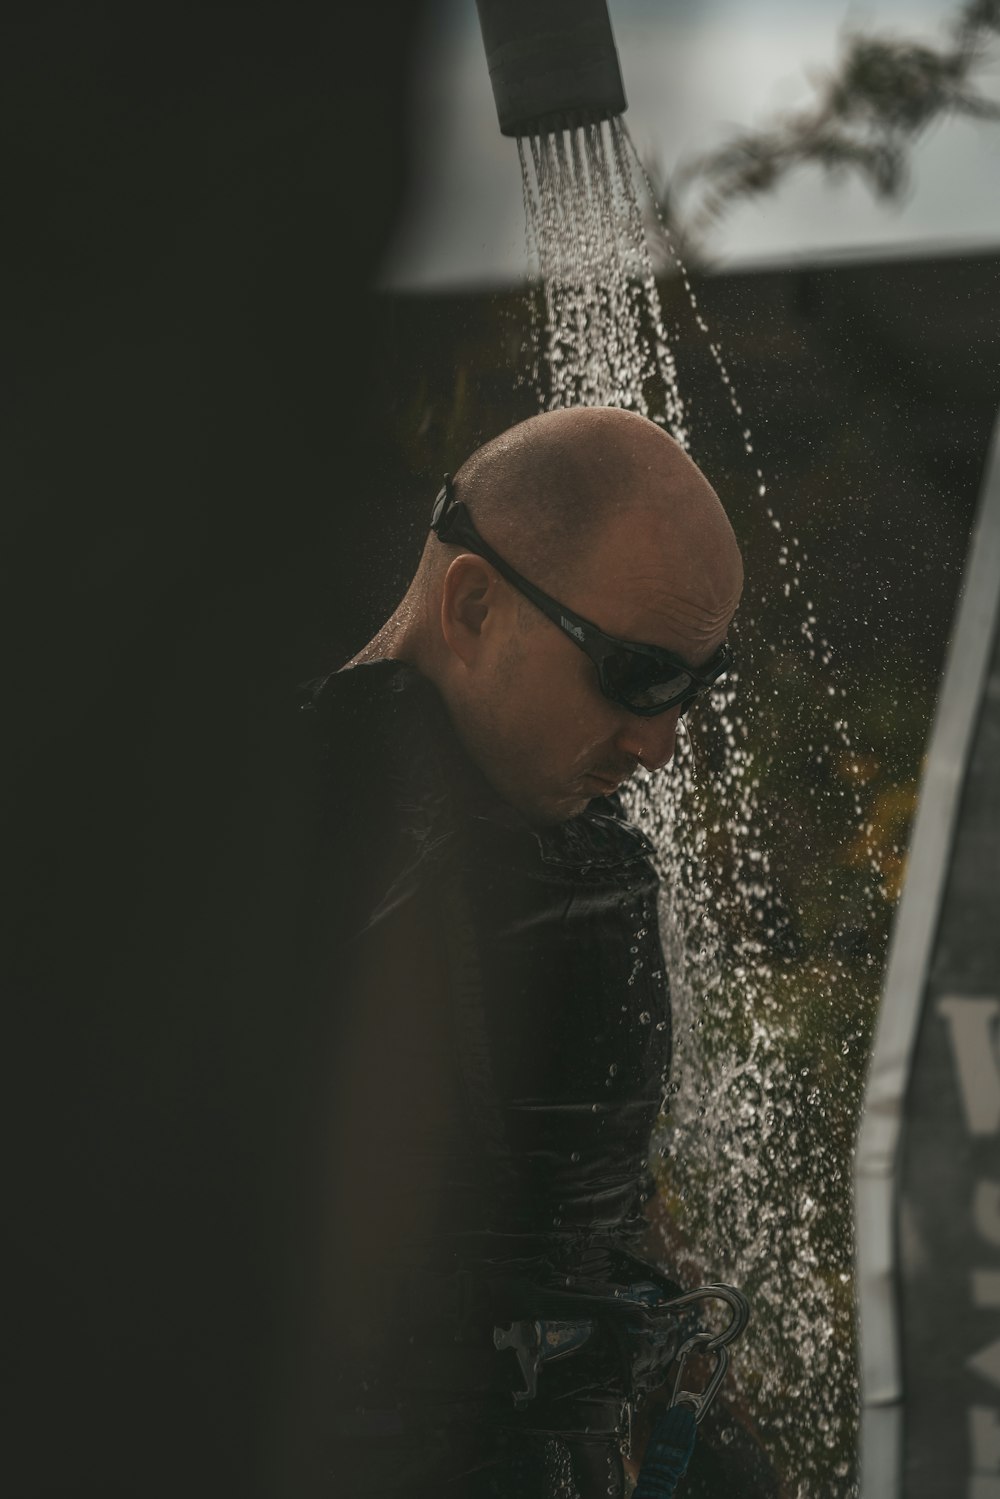 a bald man in sunglasses is spraying water from a faucet